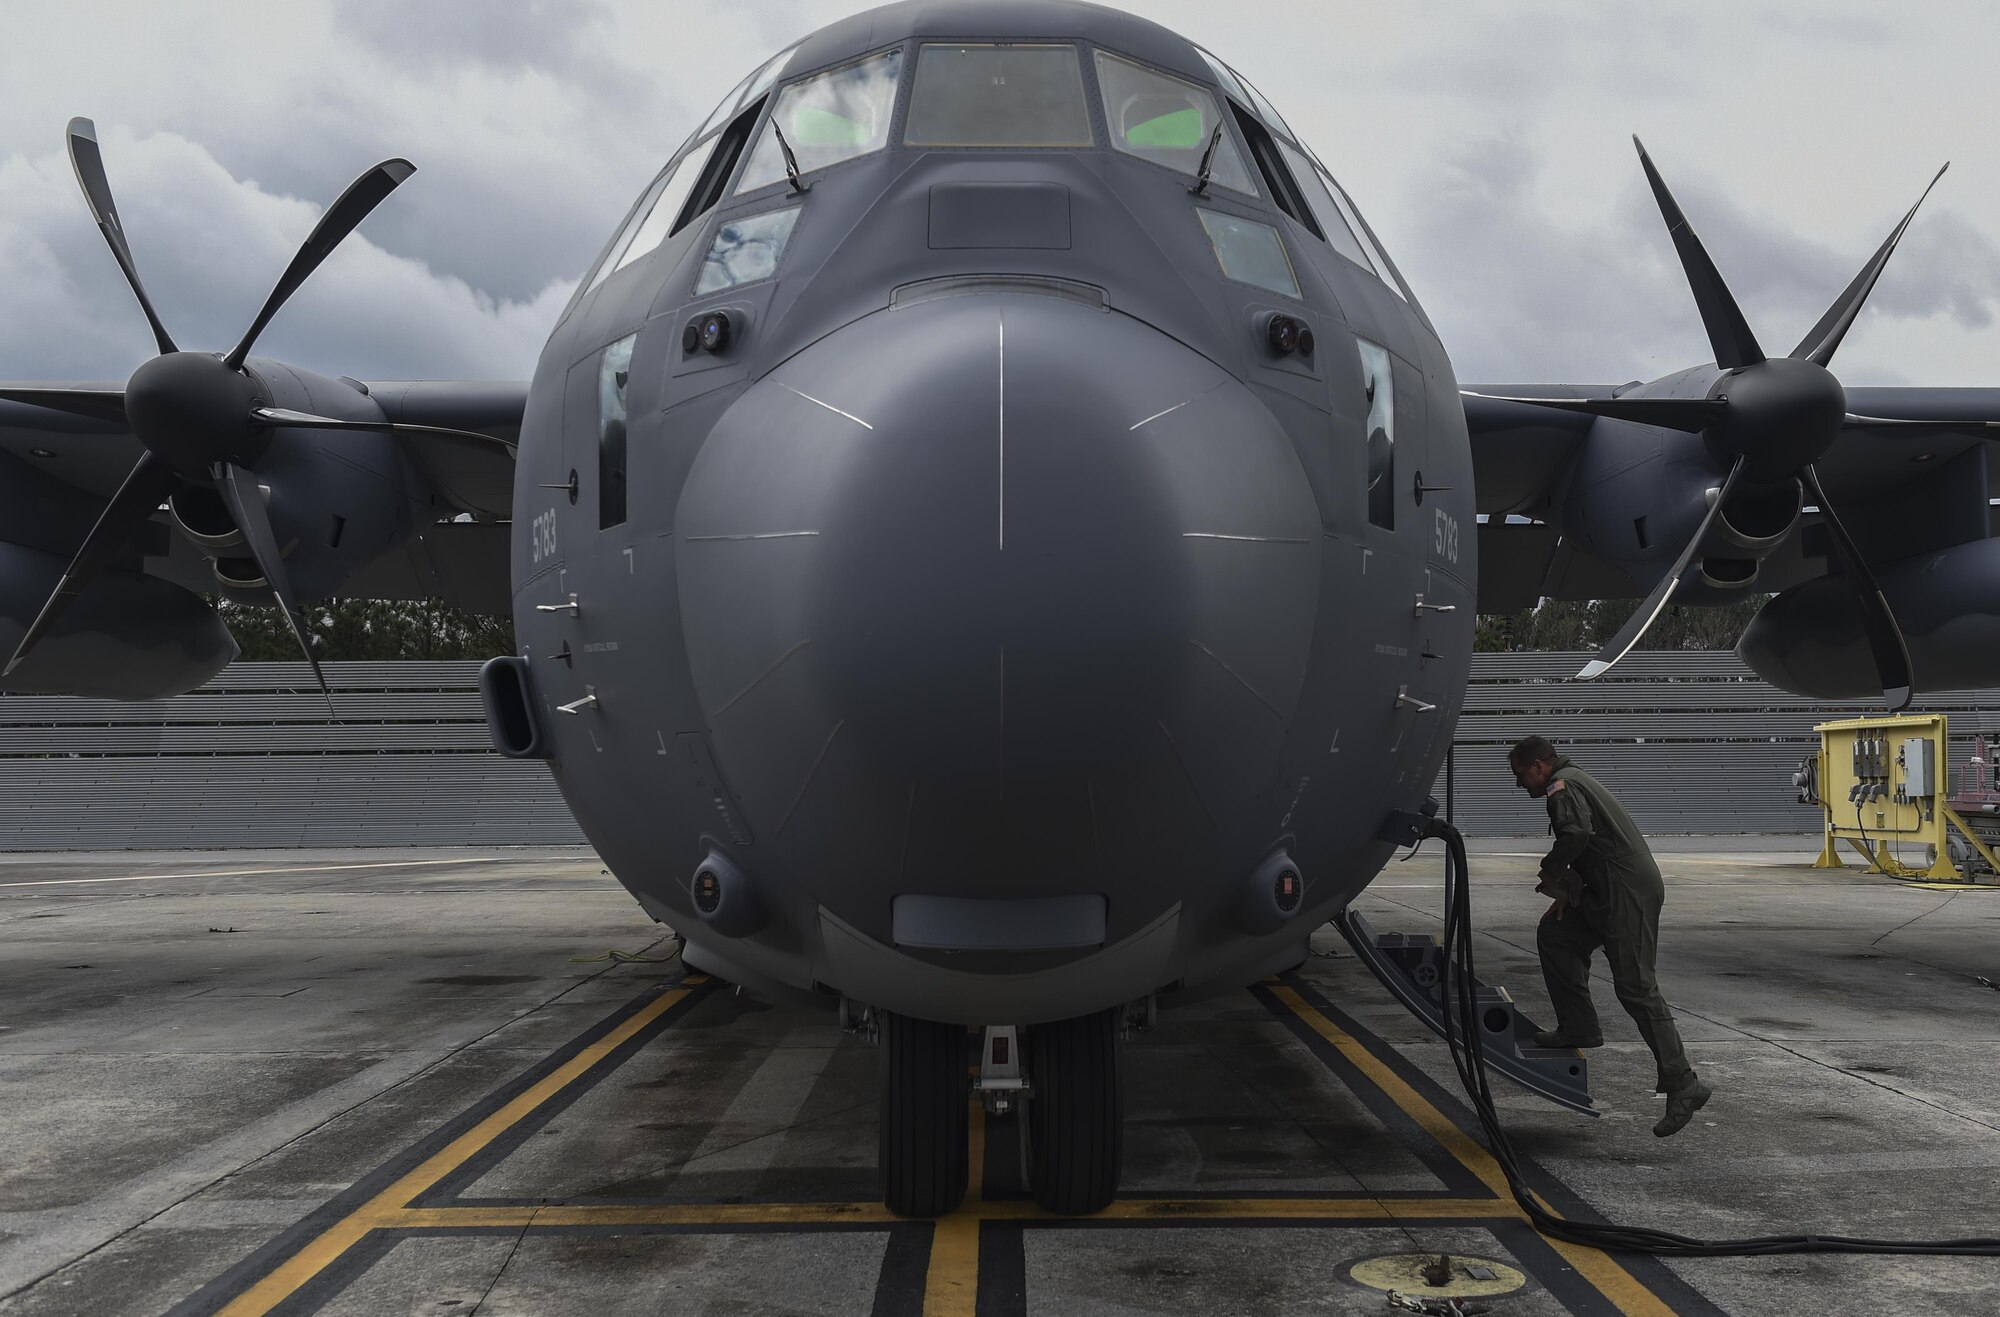 Col. Sean Farrell, commander of the 1st Special Operations Wing, boards an MC-130J Commando II at Lockheed Martin in Marietta, Ga., Dec. 11, 2015. The MC-130J will undergo modifications to become an AC-130J Ghostrider, which will provide the 1 SOW with close air support and air interdiction capabilities. (U.S. Air Force photo by Senior Airman Ryan Conroy)